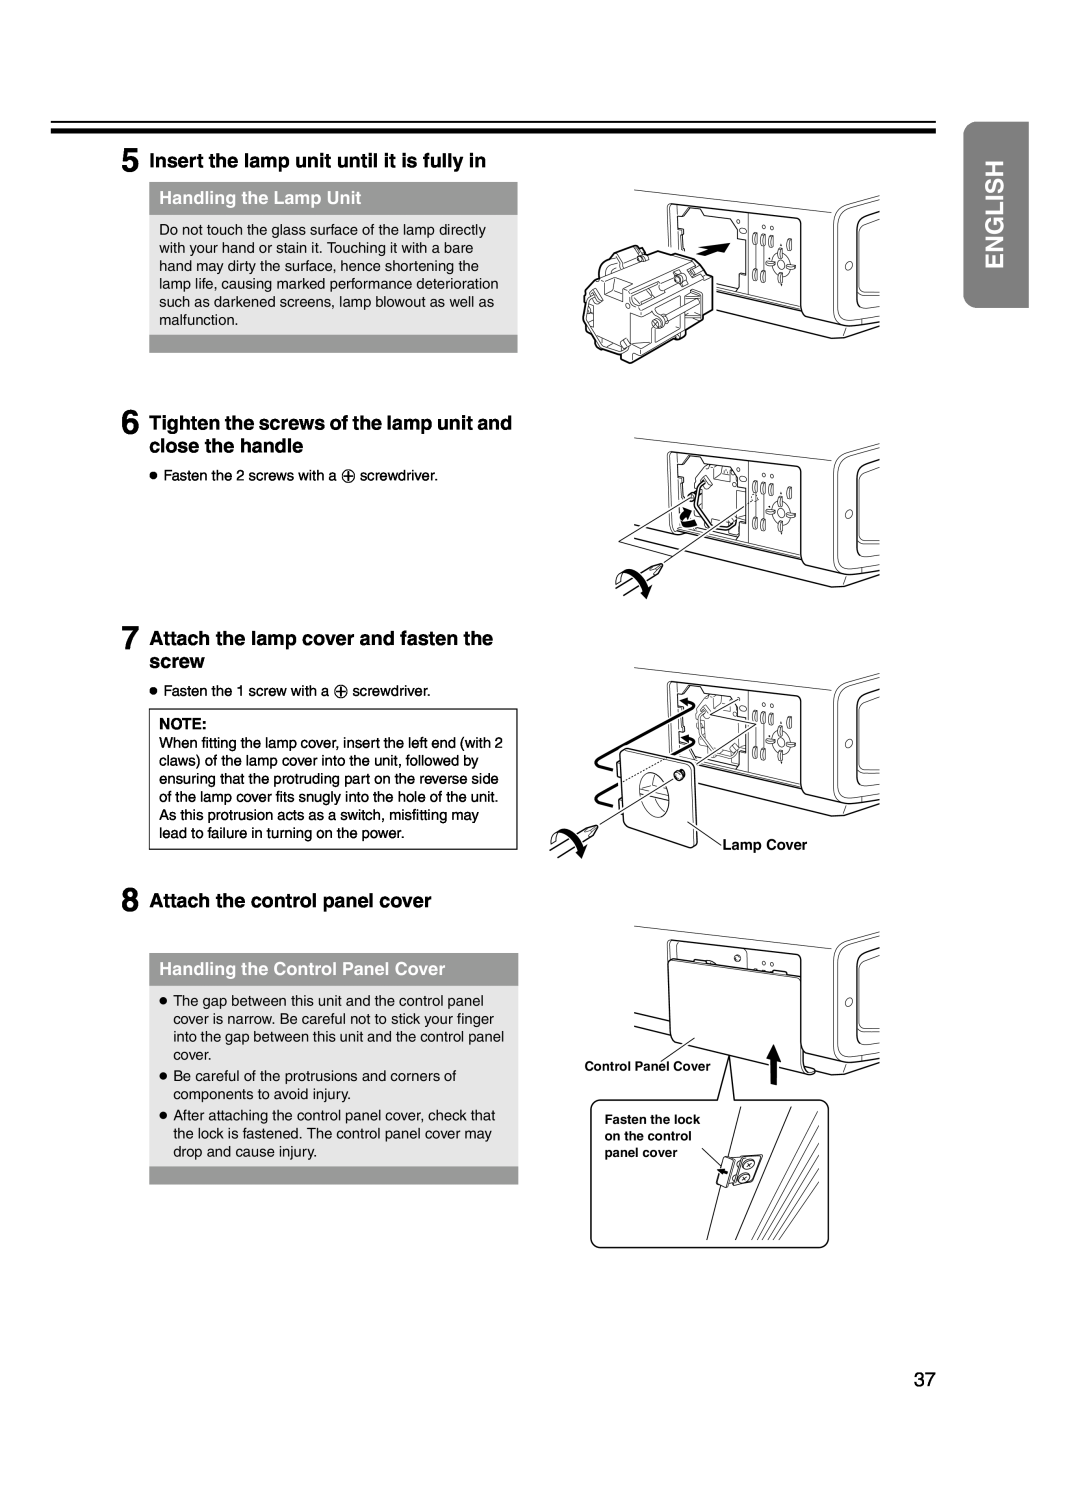 JVC DLA-HD10KSU/E e Insert the lamp unit until it is fully in, f Tighten the screws of the lamp unit and close the handle 